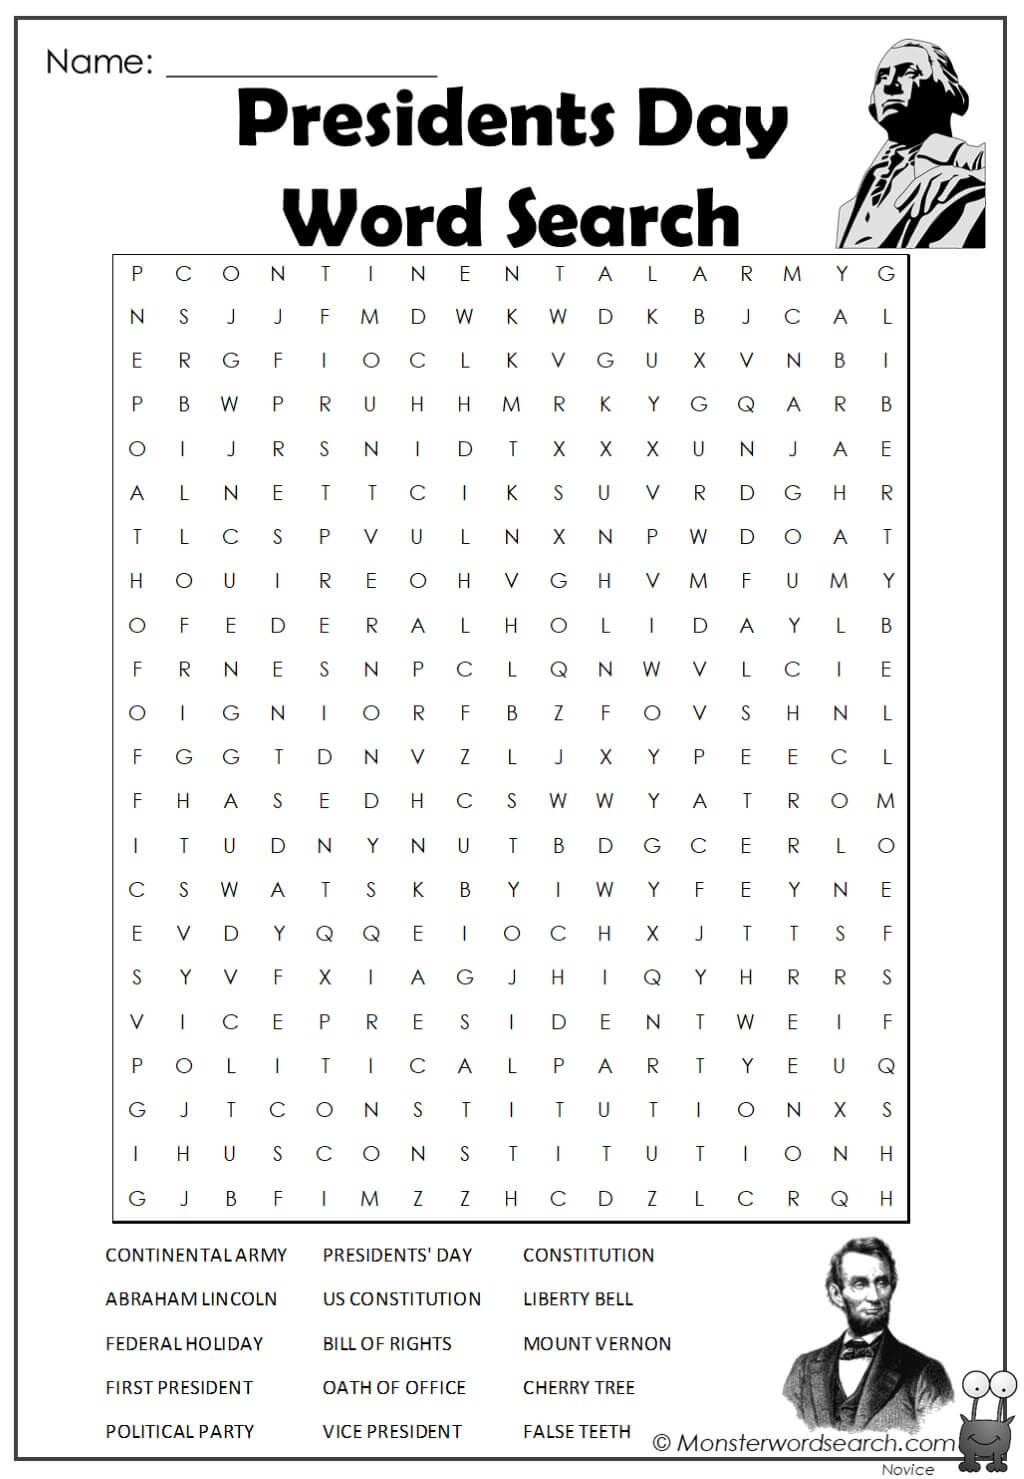 presidents-day-word-search-monster-word-search